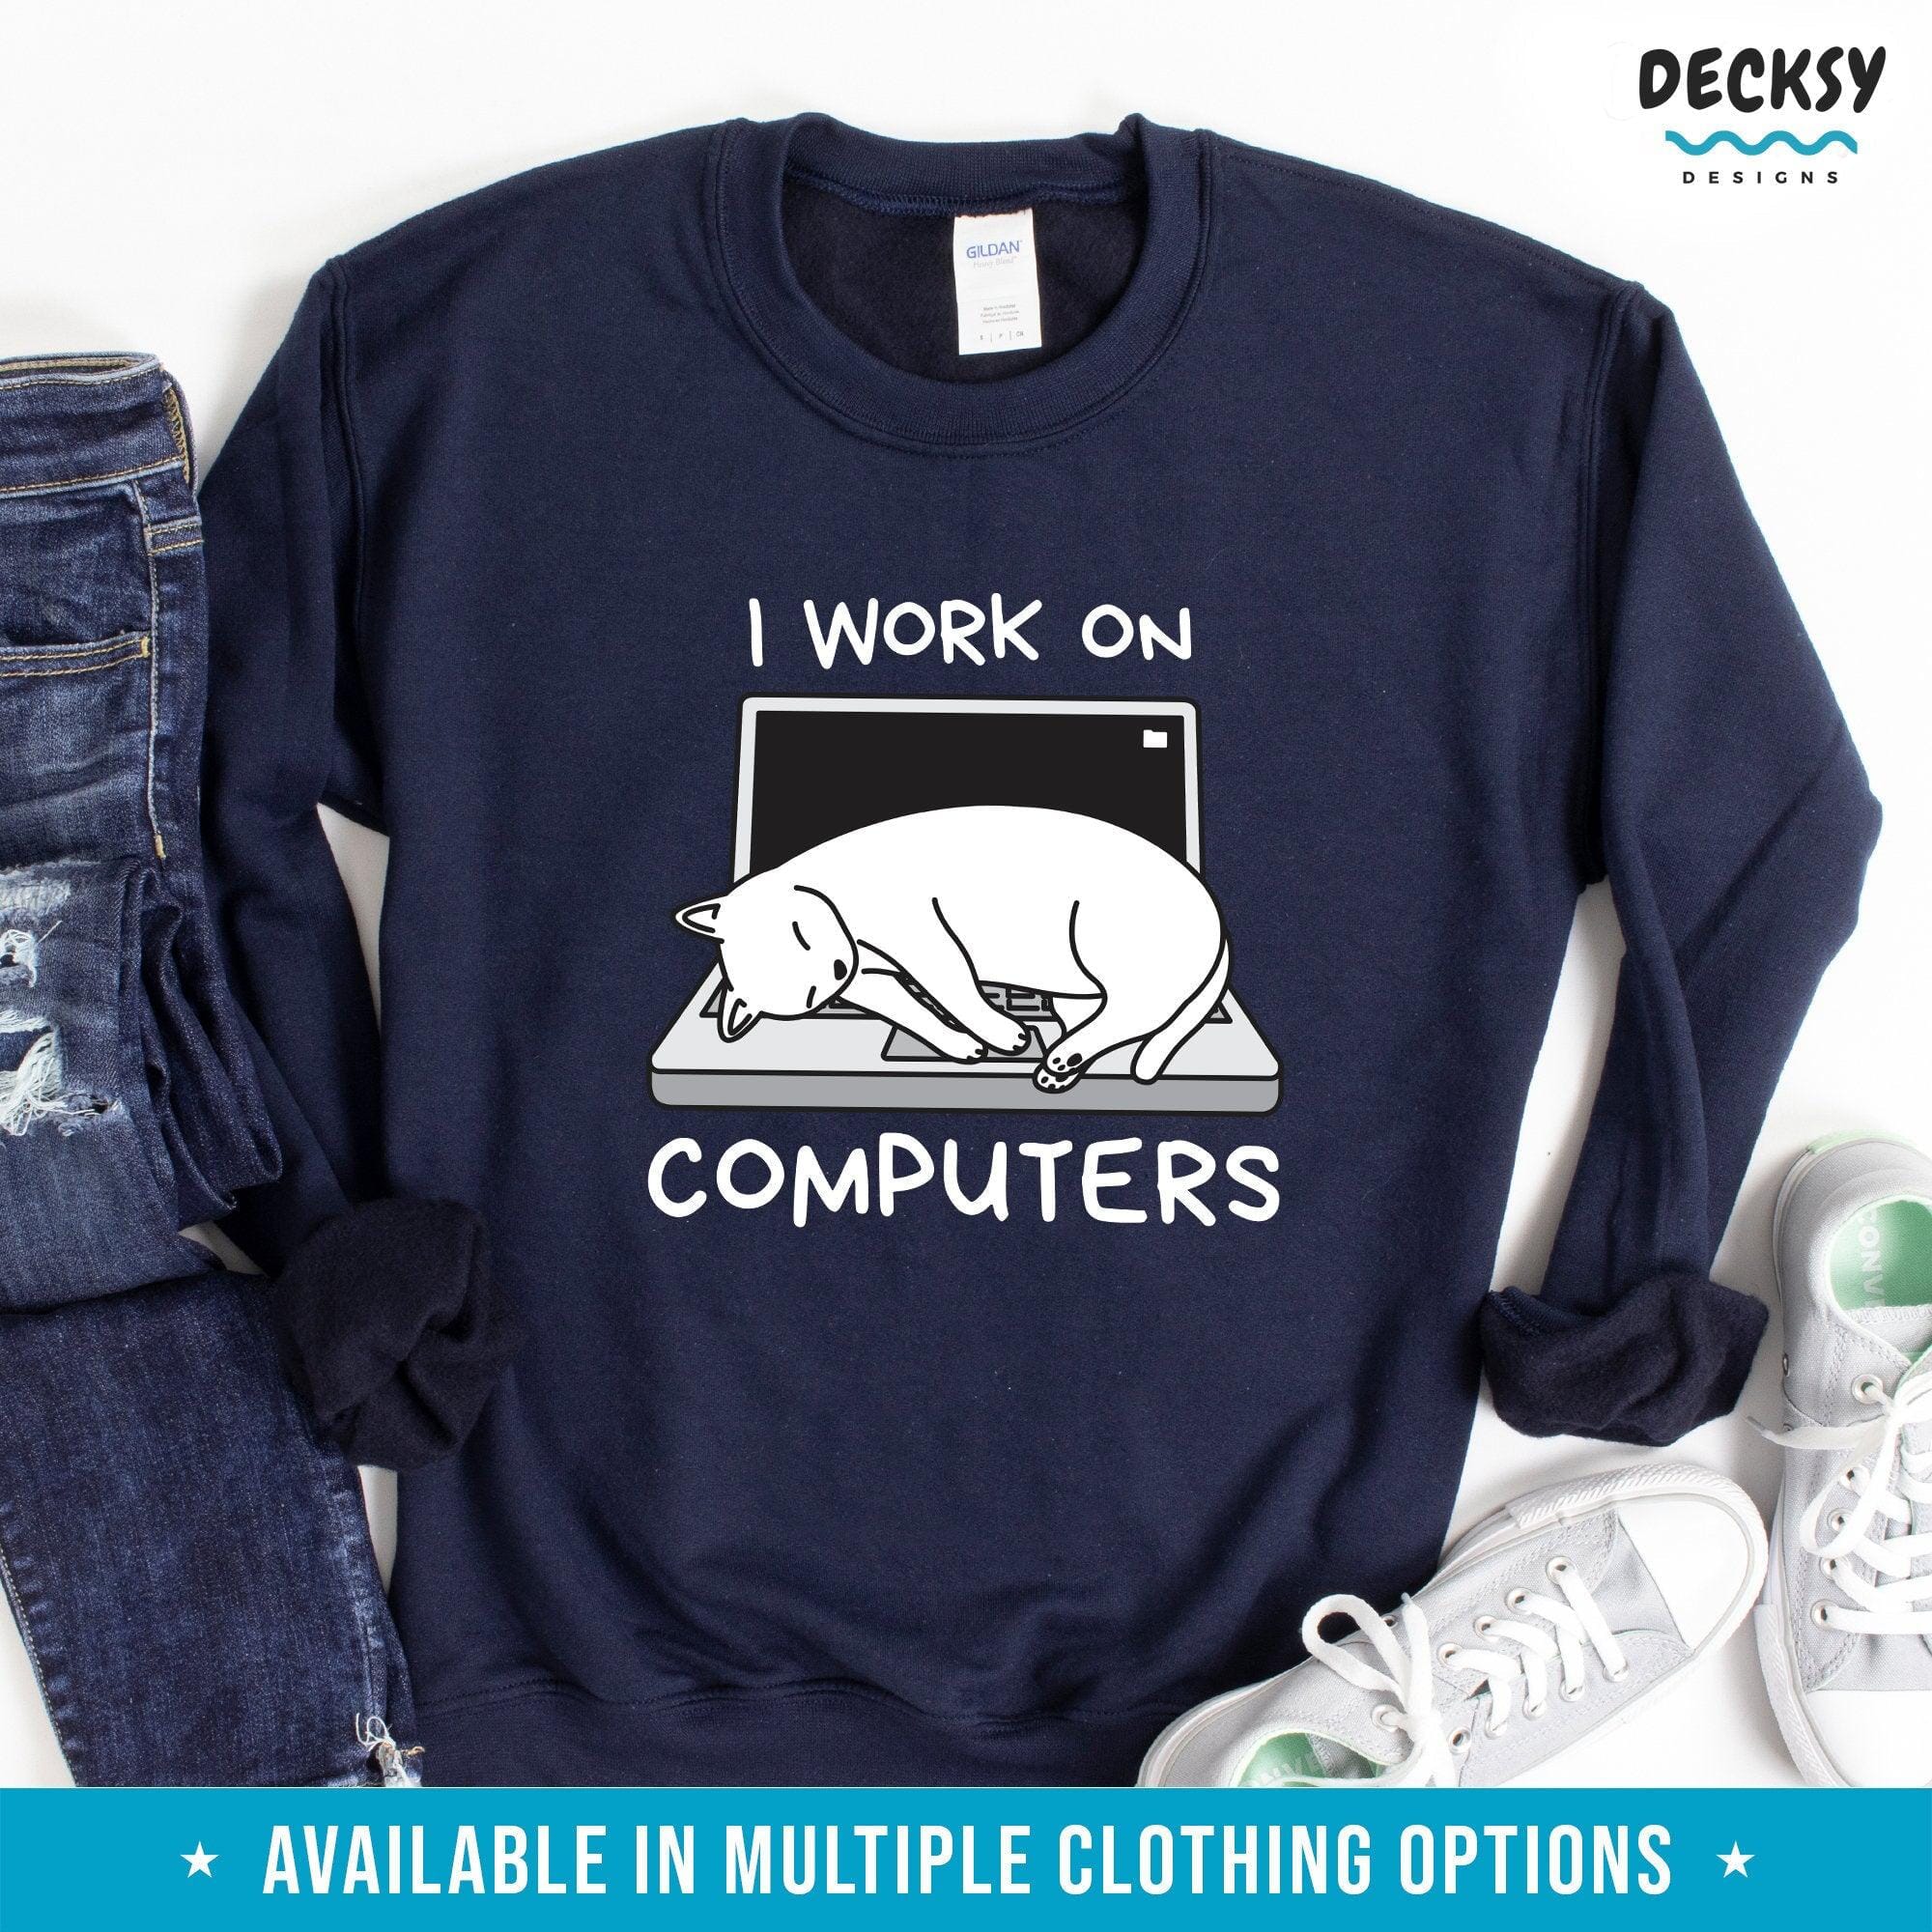 Funny Computer Cat T Shirt, Gift For Cat Lover-Clothing:Gender-Neutral Adult Clothing:Tops & Tees:T-shirts:Graphic Tees-DecksyDesigns